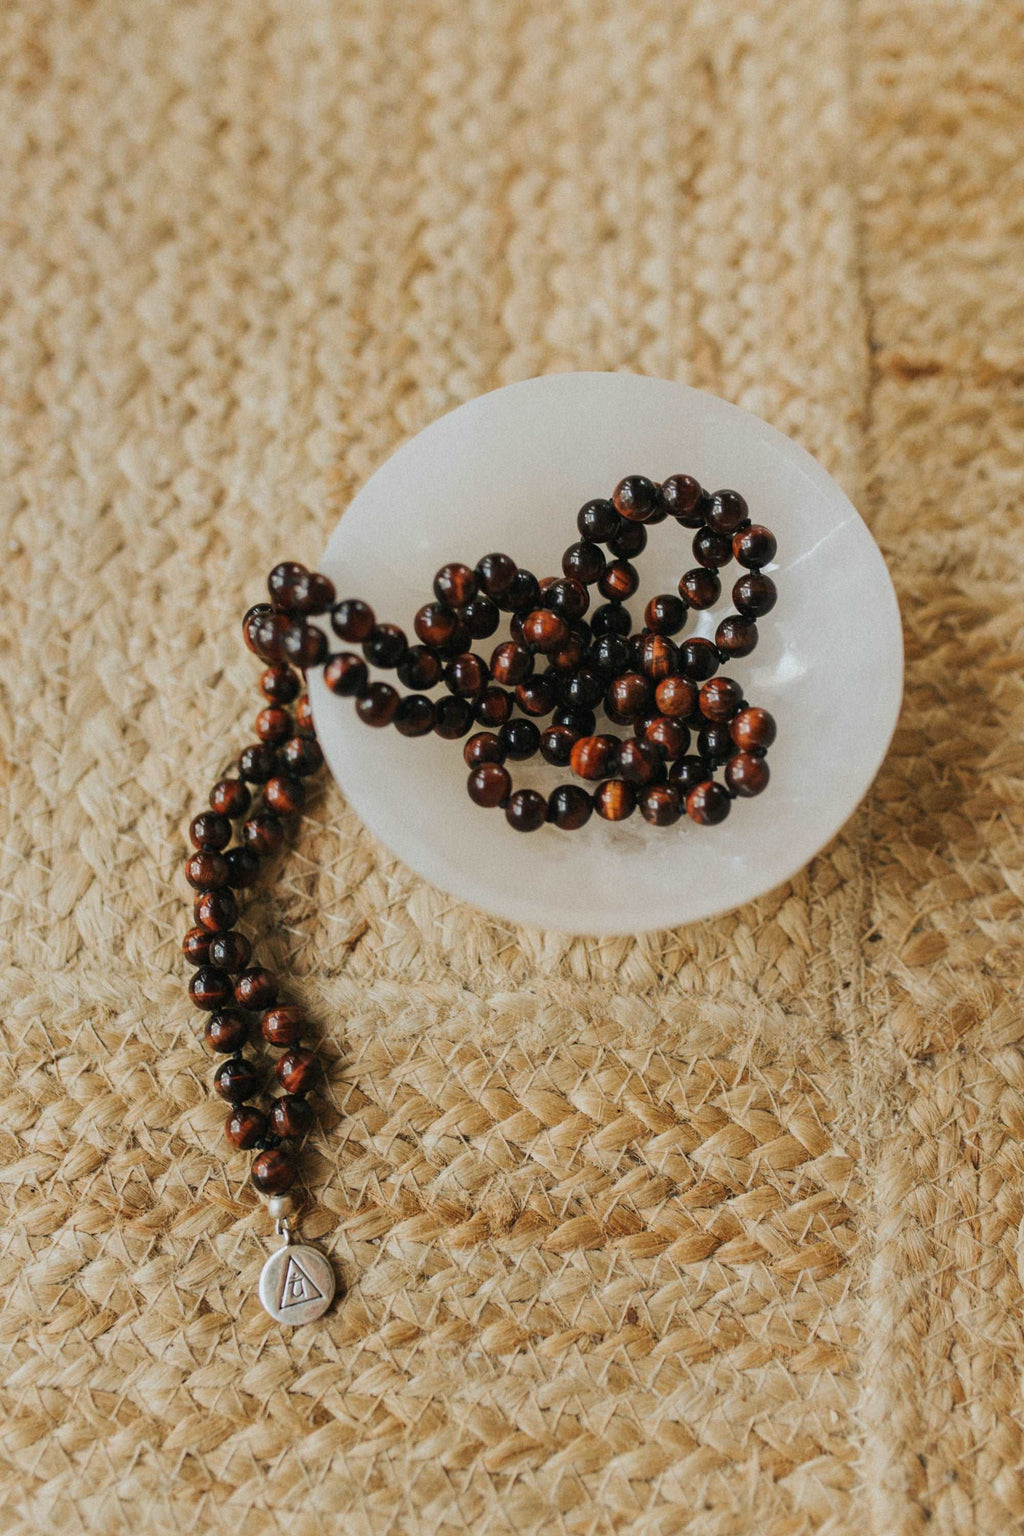 INNER POWER - Red Tiger's Eye Mala // PRE-ORDER (delivery 20th of March) YAM Mala Beads